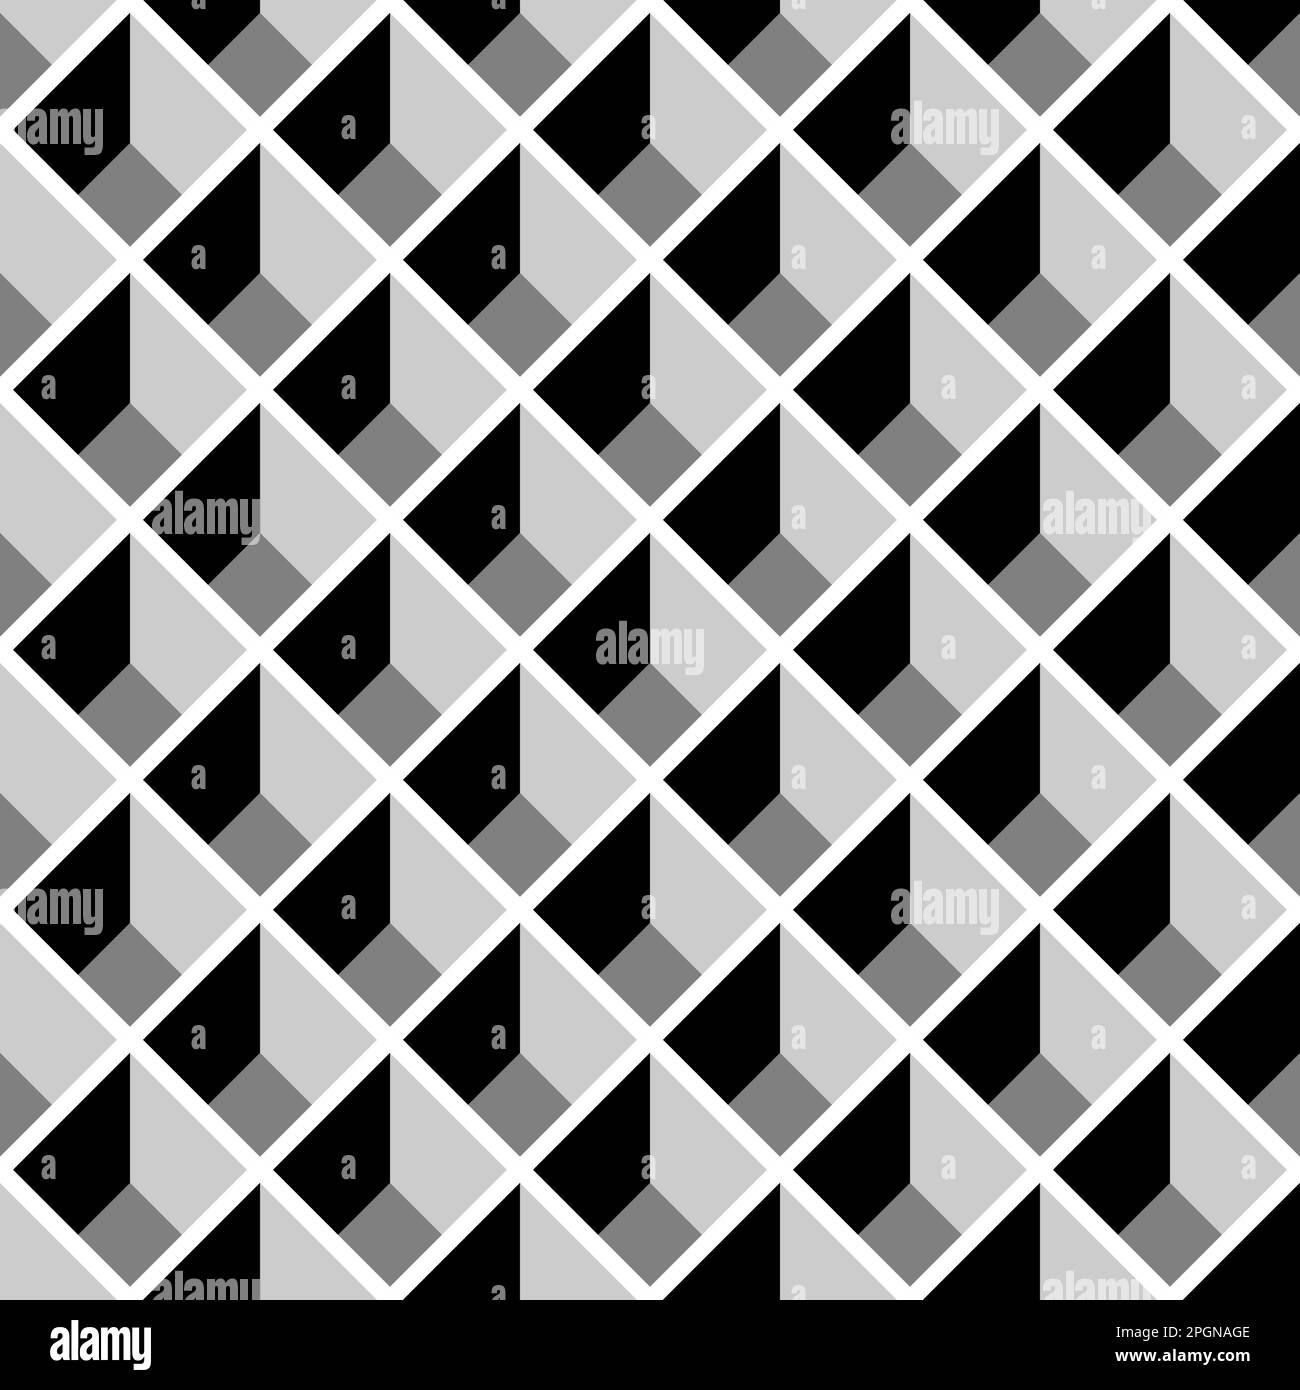 Seamless vector graphic in shades of grey of a three dimensional array of boxes Stock Vector